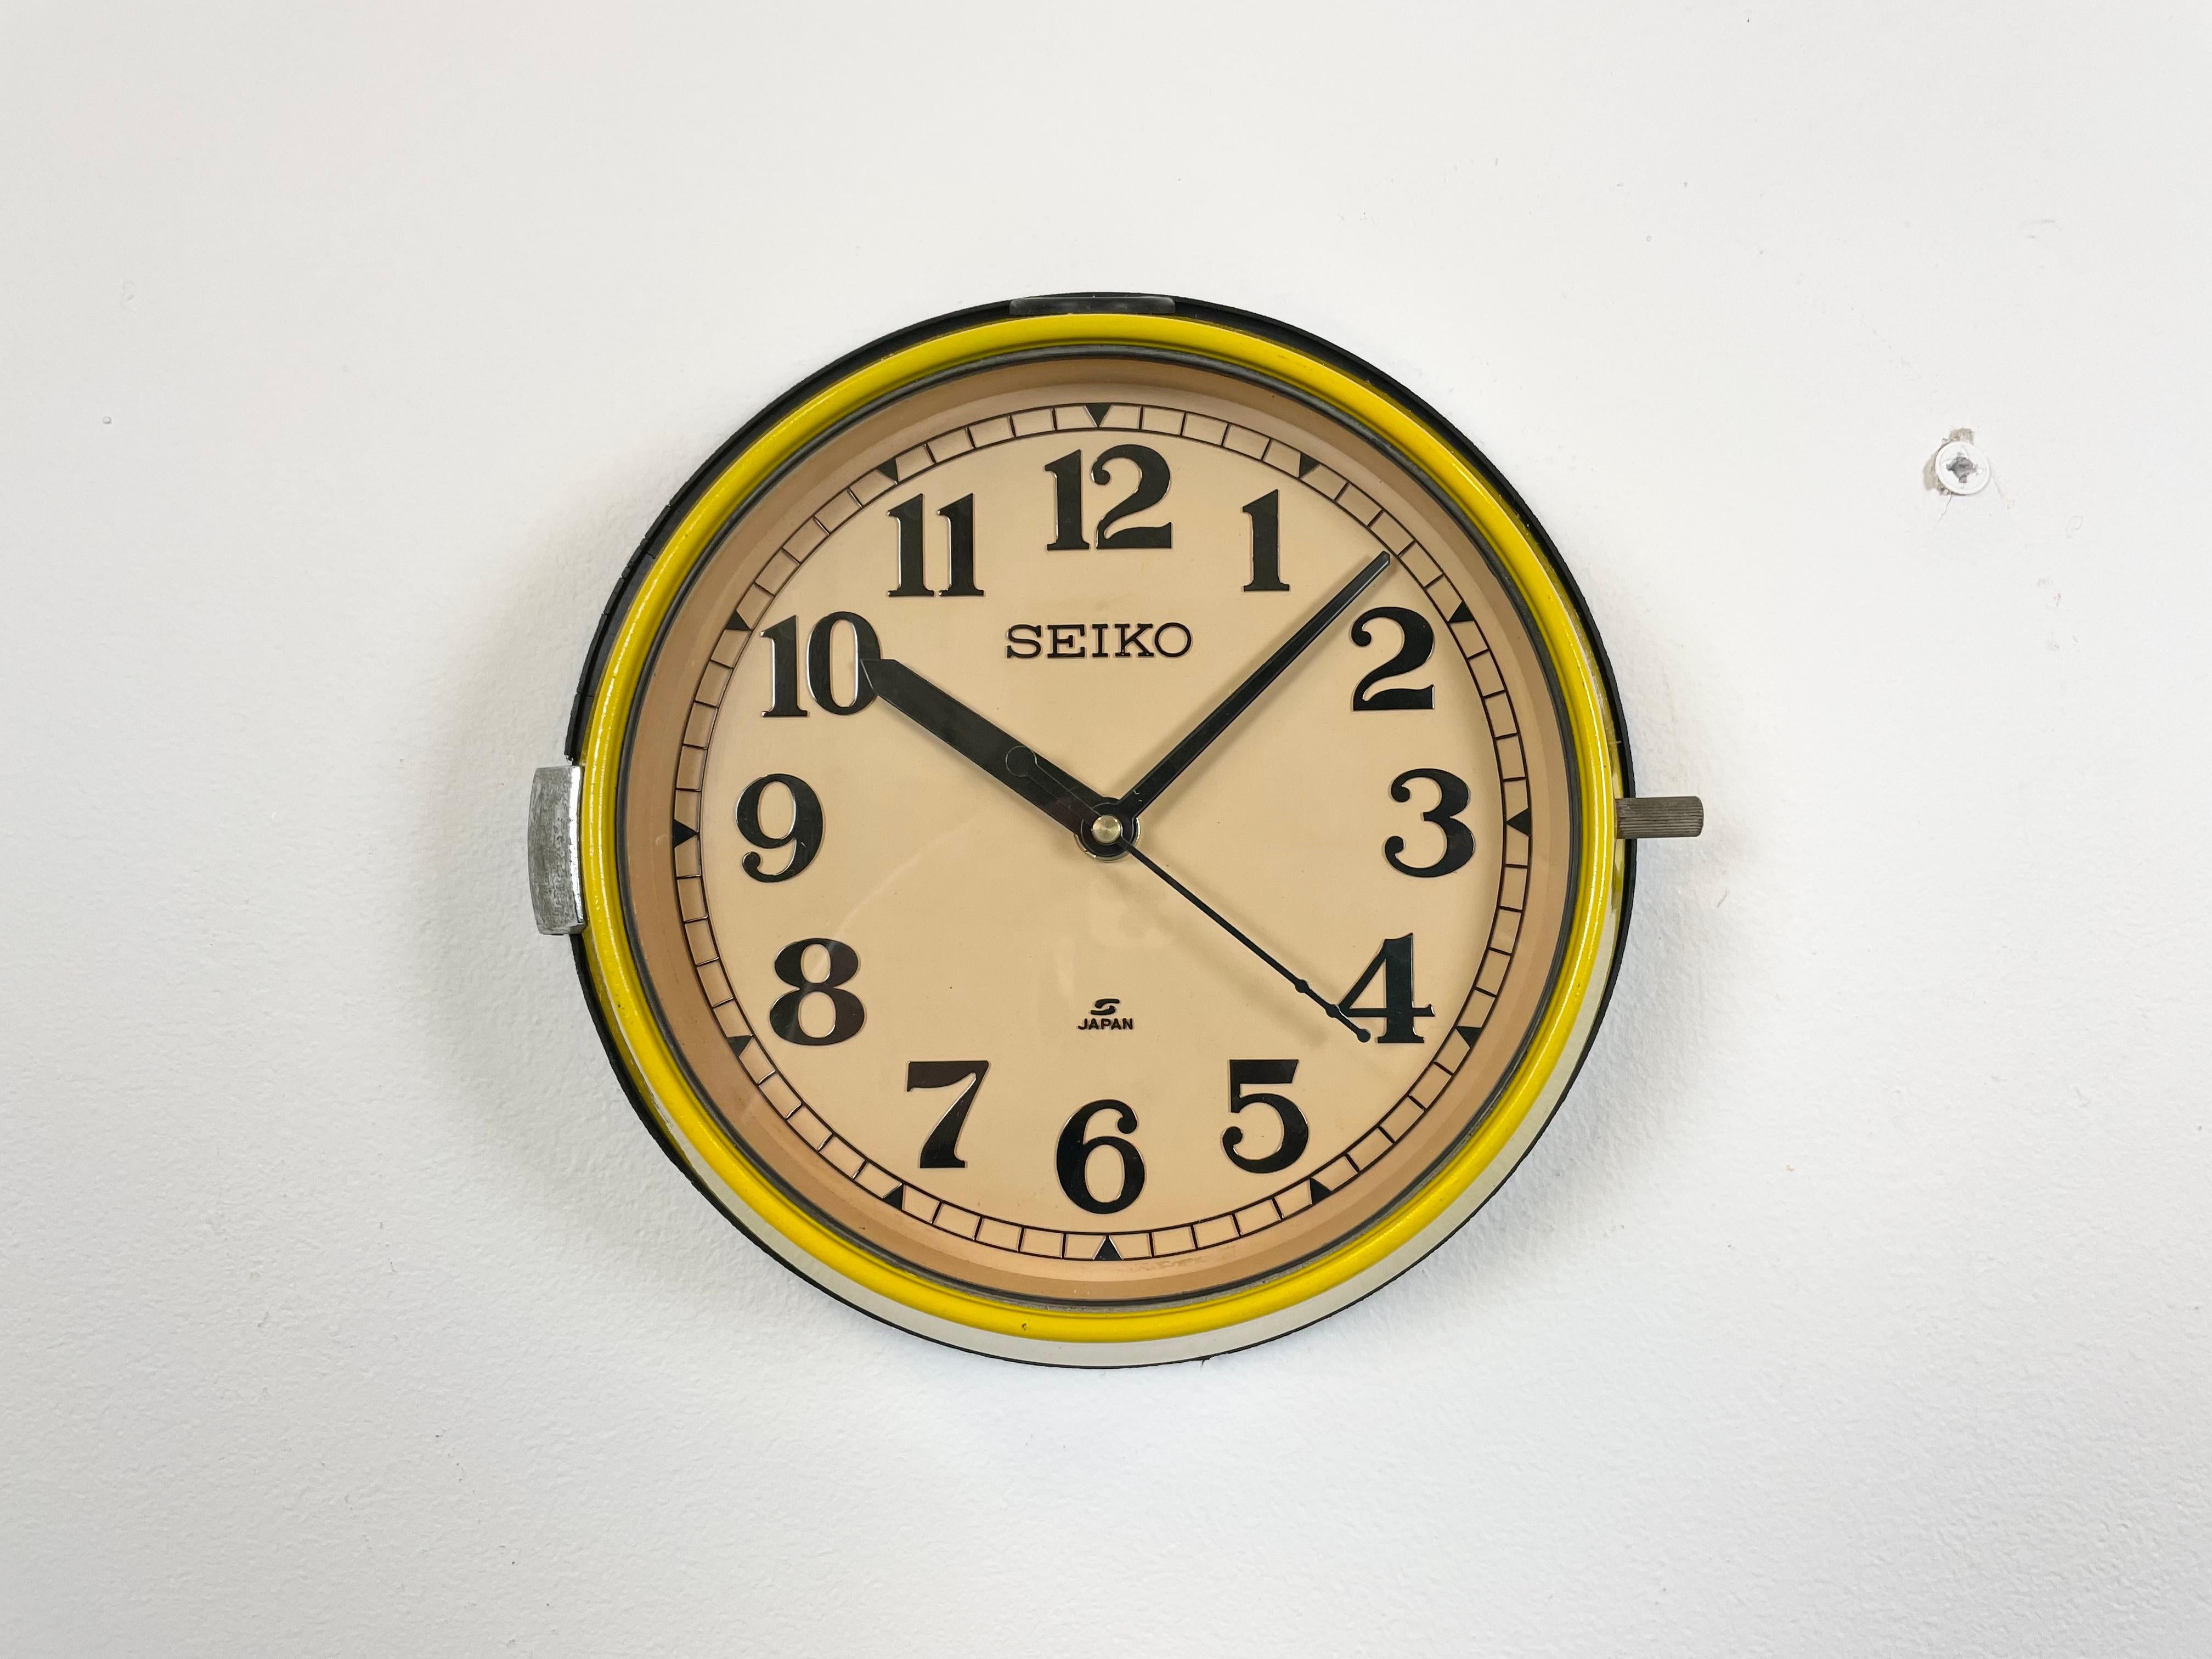 Vintage Seiko navy slave clock designed during the 1970s and produced till 1990s. These clocks were used on large Japanese tankers and cargo ships. It features a yellow metal frame, a plastic dial and clear glass cover. This item has been converted